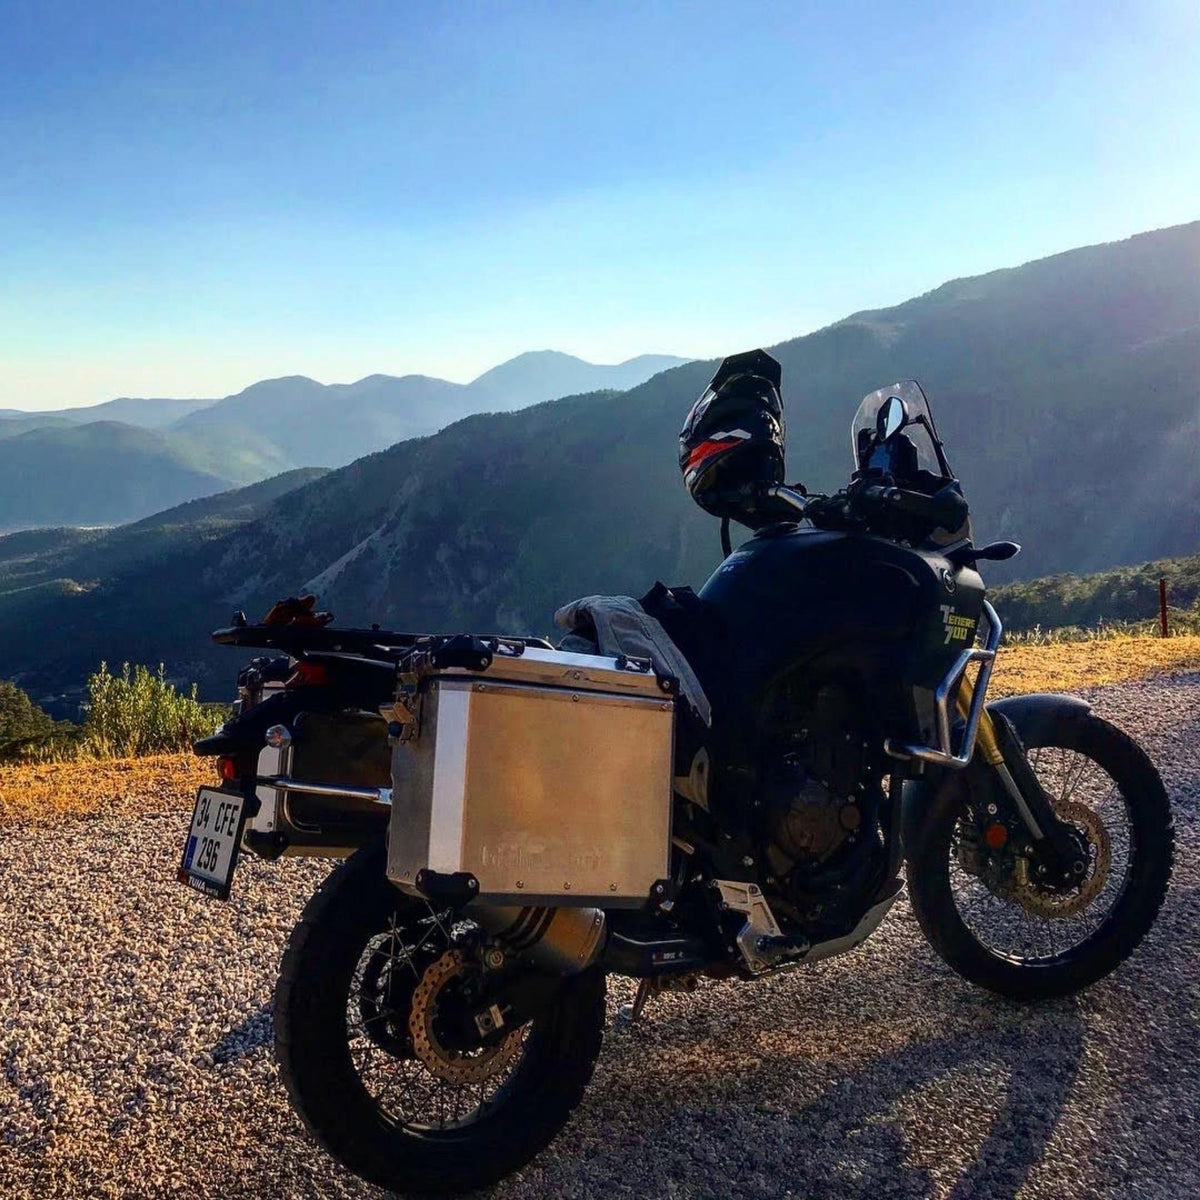 GlobeScout USA, XPAN+ Aluminum Side Case Set, Yamaha Tenere 700 (2019-2021), 2.02.02401, adventure bike luggage, adventure motorcycle panniers, aluminum side cases, GlobeScout motorcycle luggage, GlobeScout XPAN+, Side Case Set, XPAN+, Yamaha, Yamaha Tenere 700, Side Case Sets - Premium handmade adventure equipment including side cases (panniers) and top cases made from high strength aluminum magnesium alloy with high grade stainless steel hardware, locks, and dual seal lid to prevent dust and water - Impor